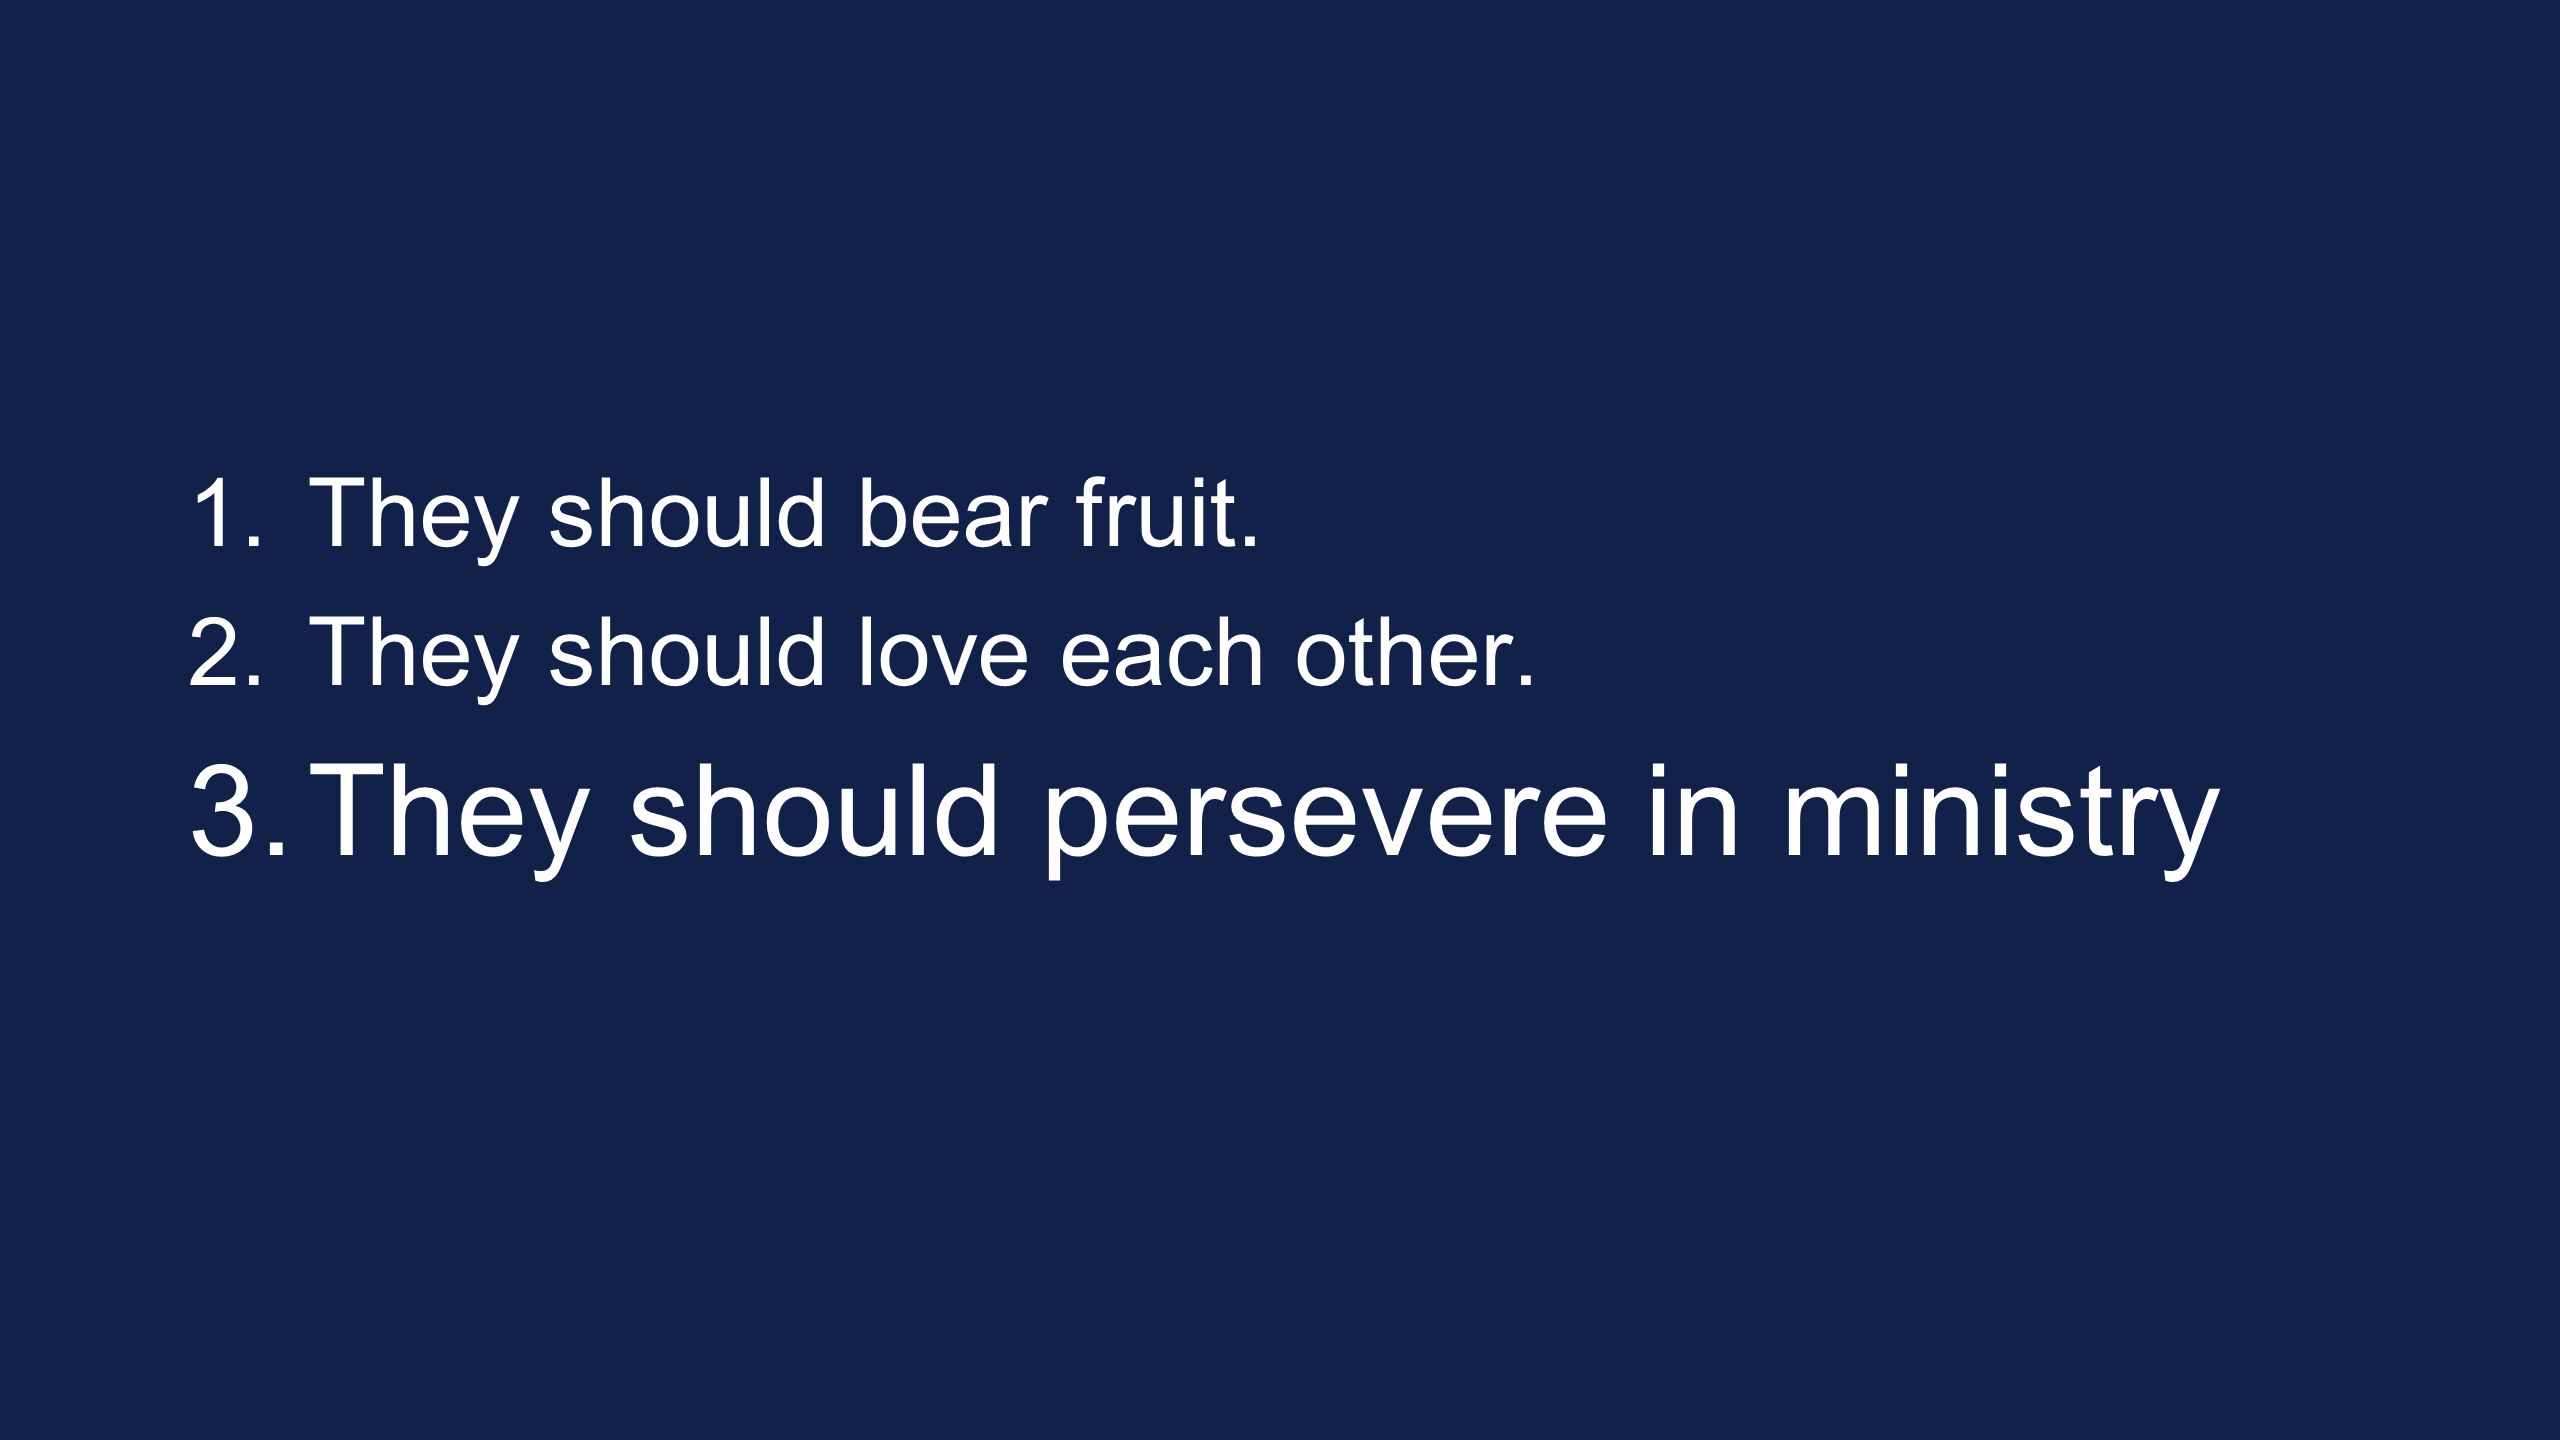 1. They should bear fruit. 2. They should love each other. 3. They should persevere in ministry